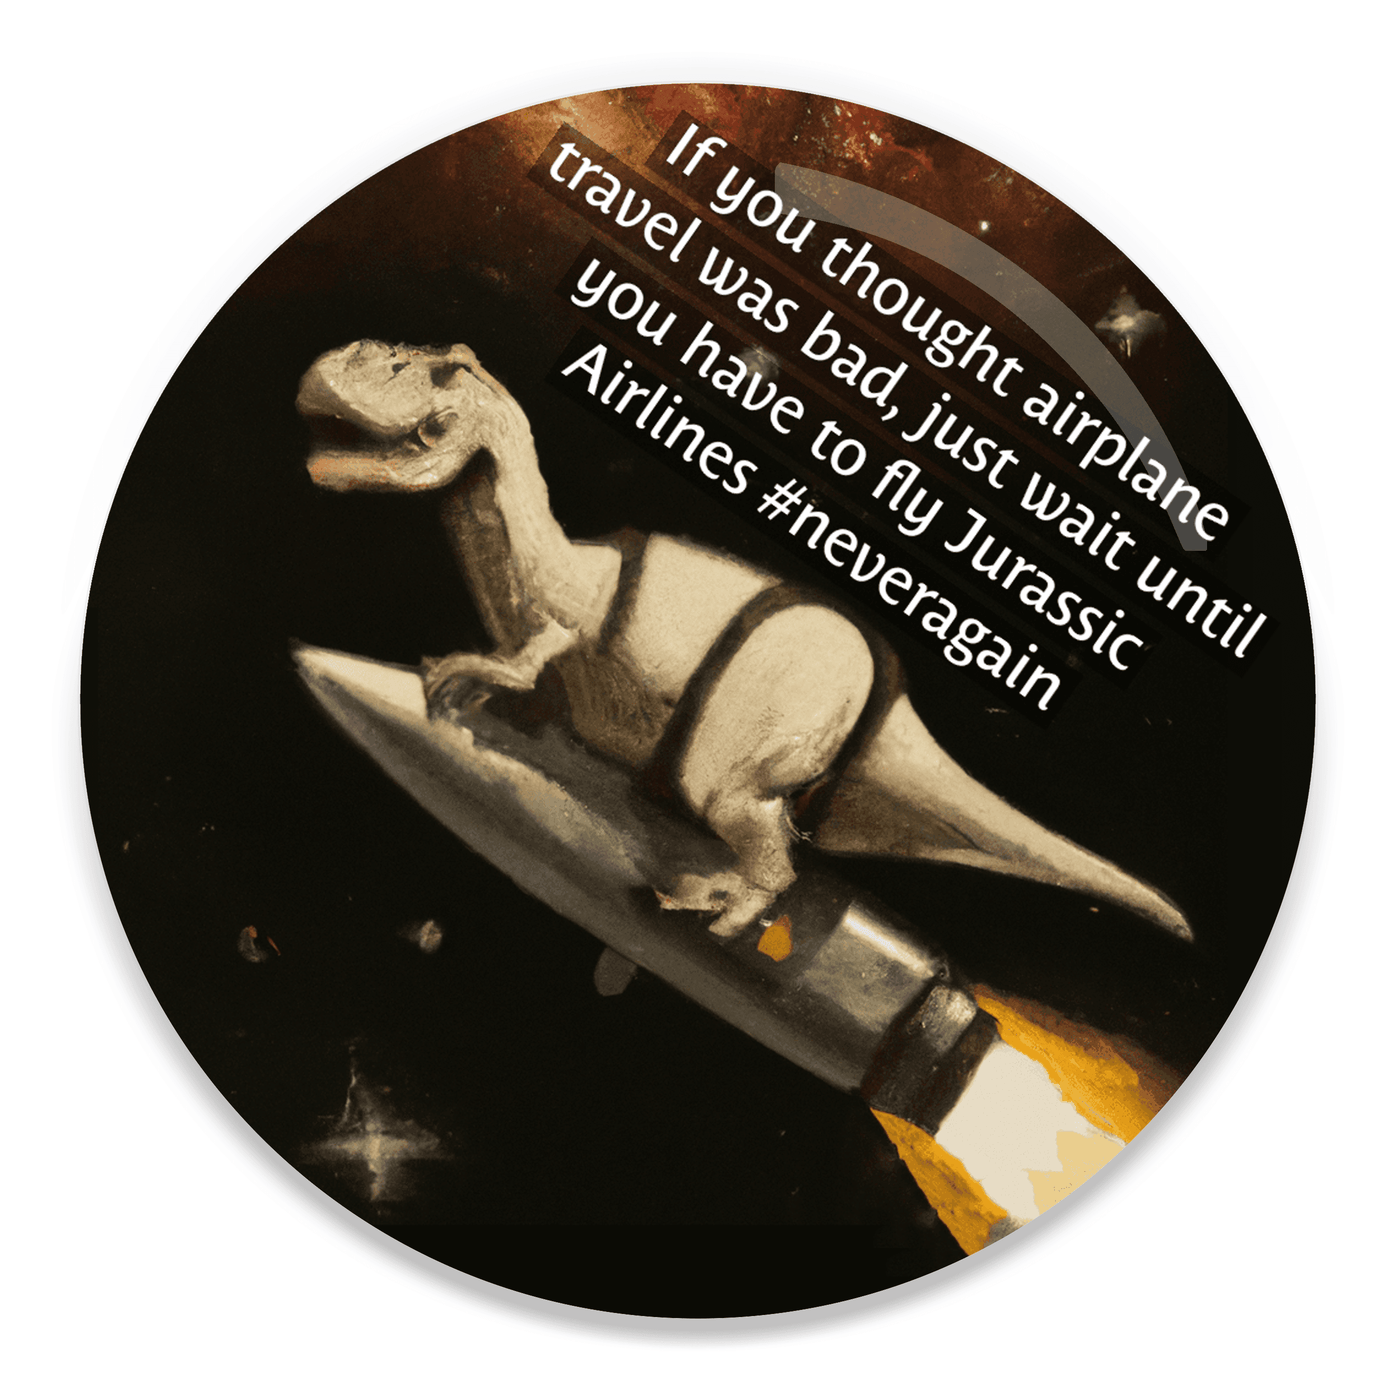 2.25 inch round colorful magnet with image of a dinosaur riding a rocket